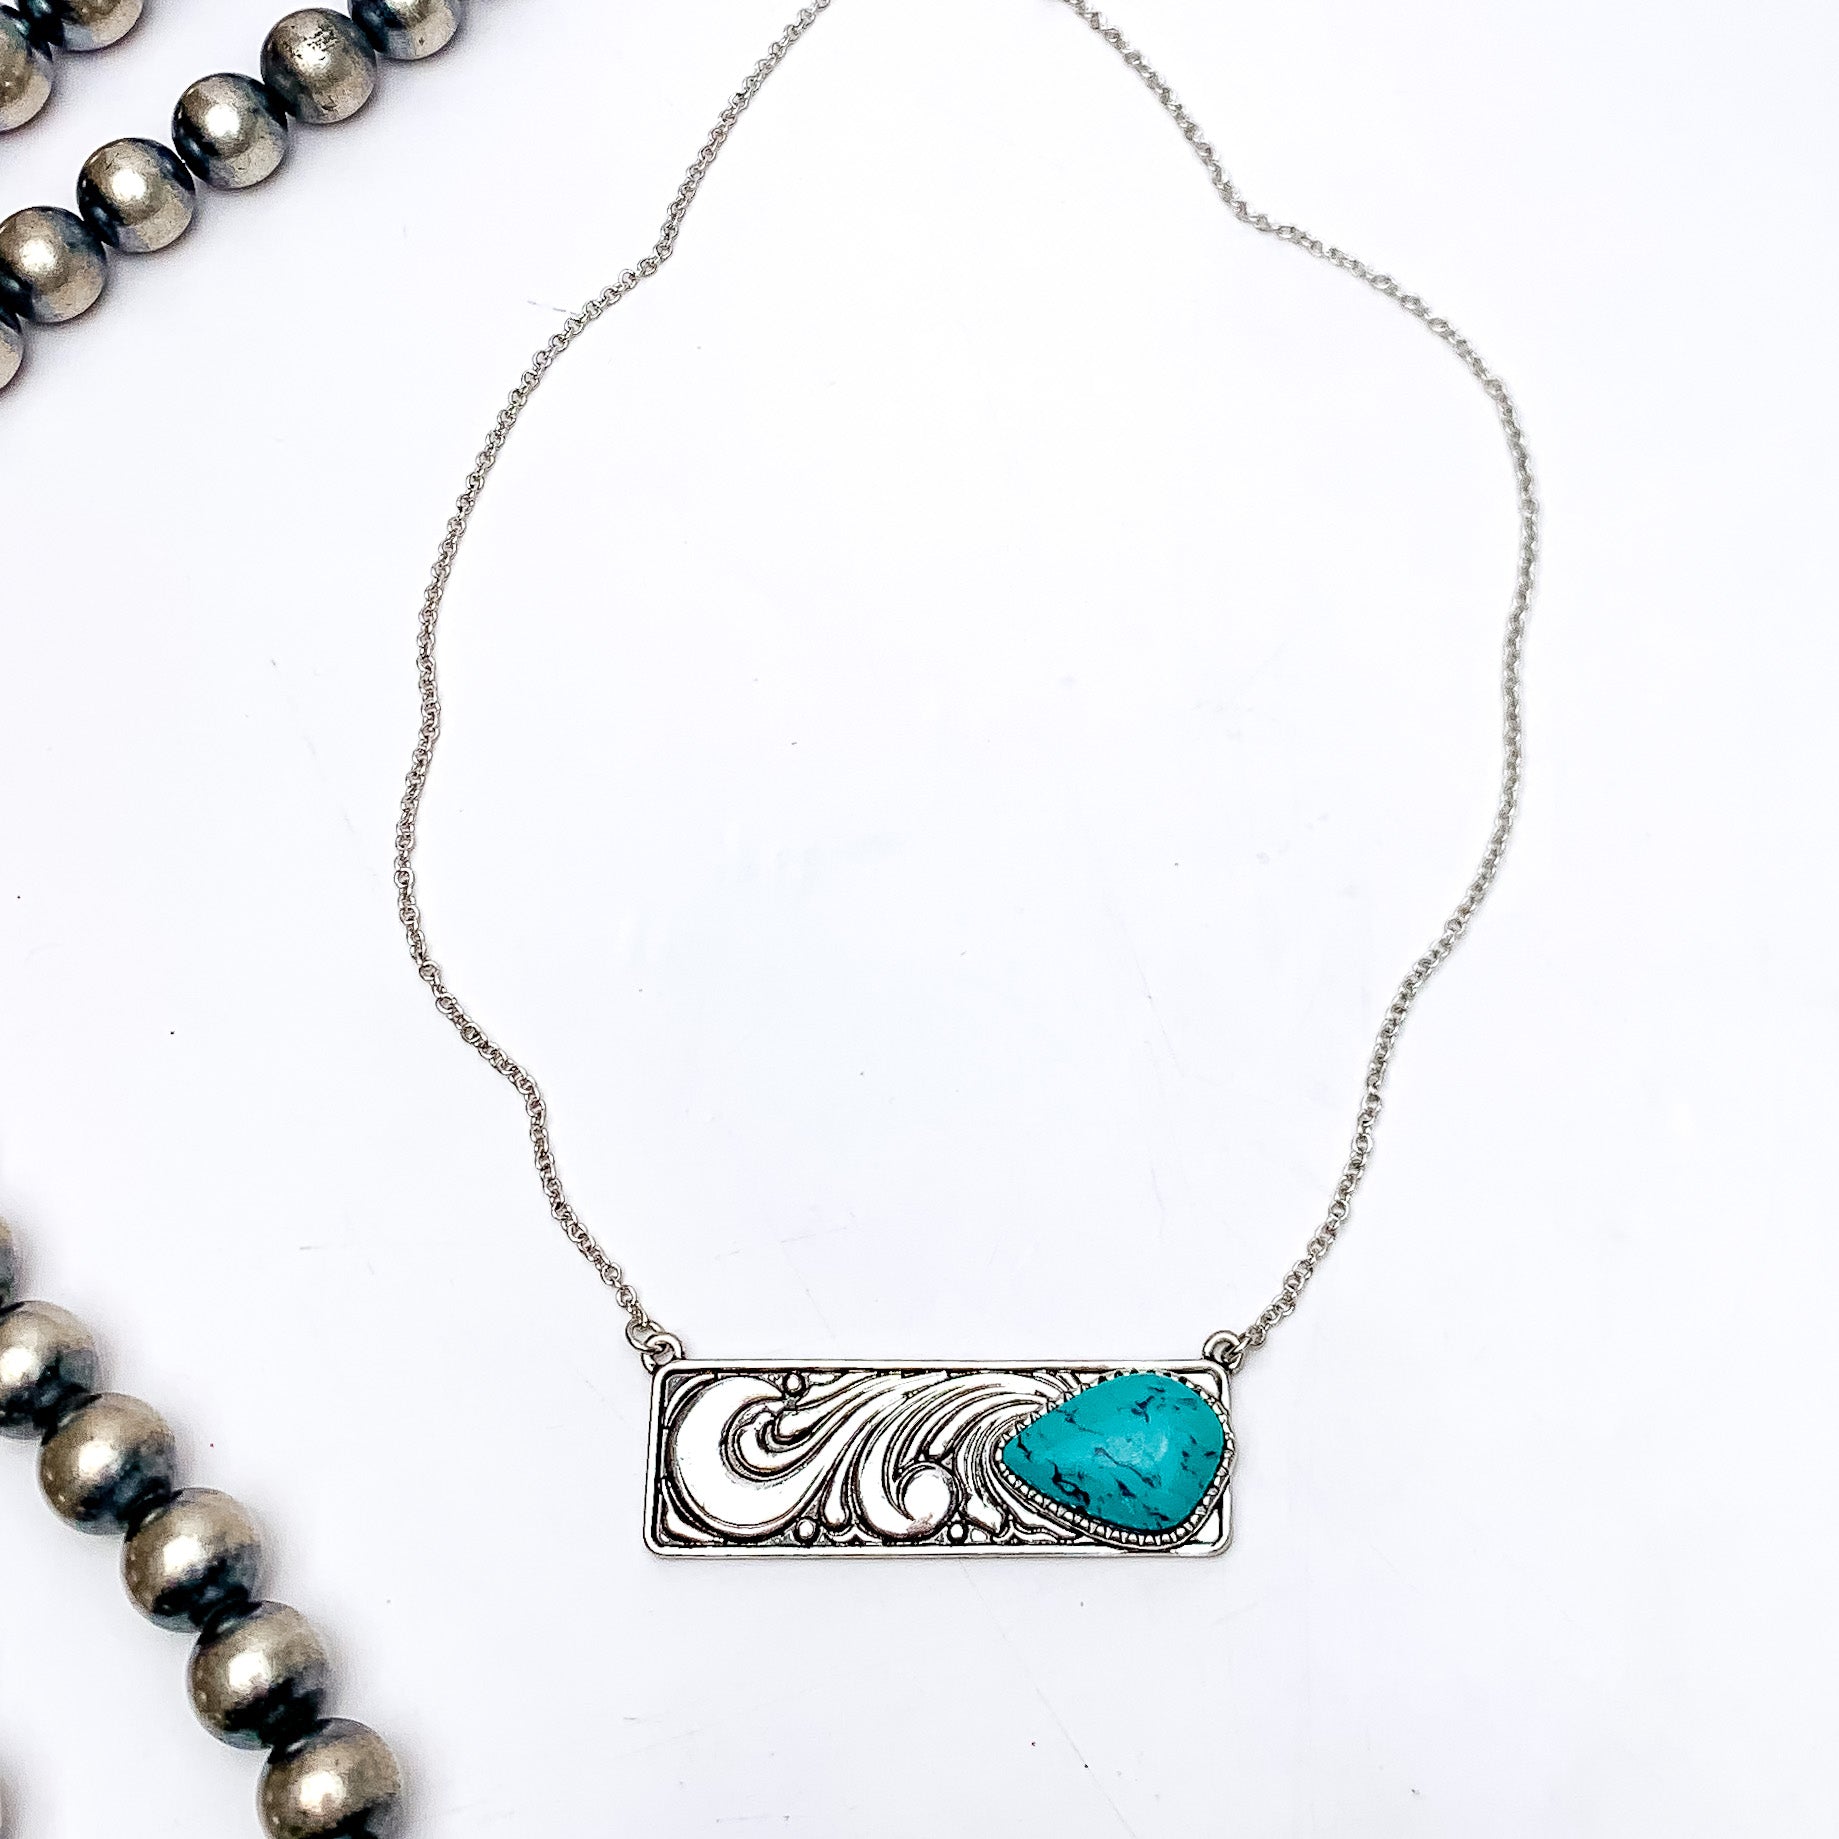 Western Swirl Silver Tone Necklace With Bar Pendent and Turquoise Stone. This necklace is pictured on a white background with Navajo pearls on the left side.